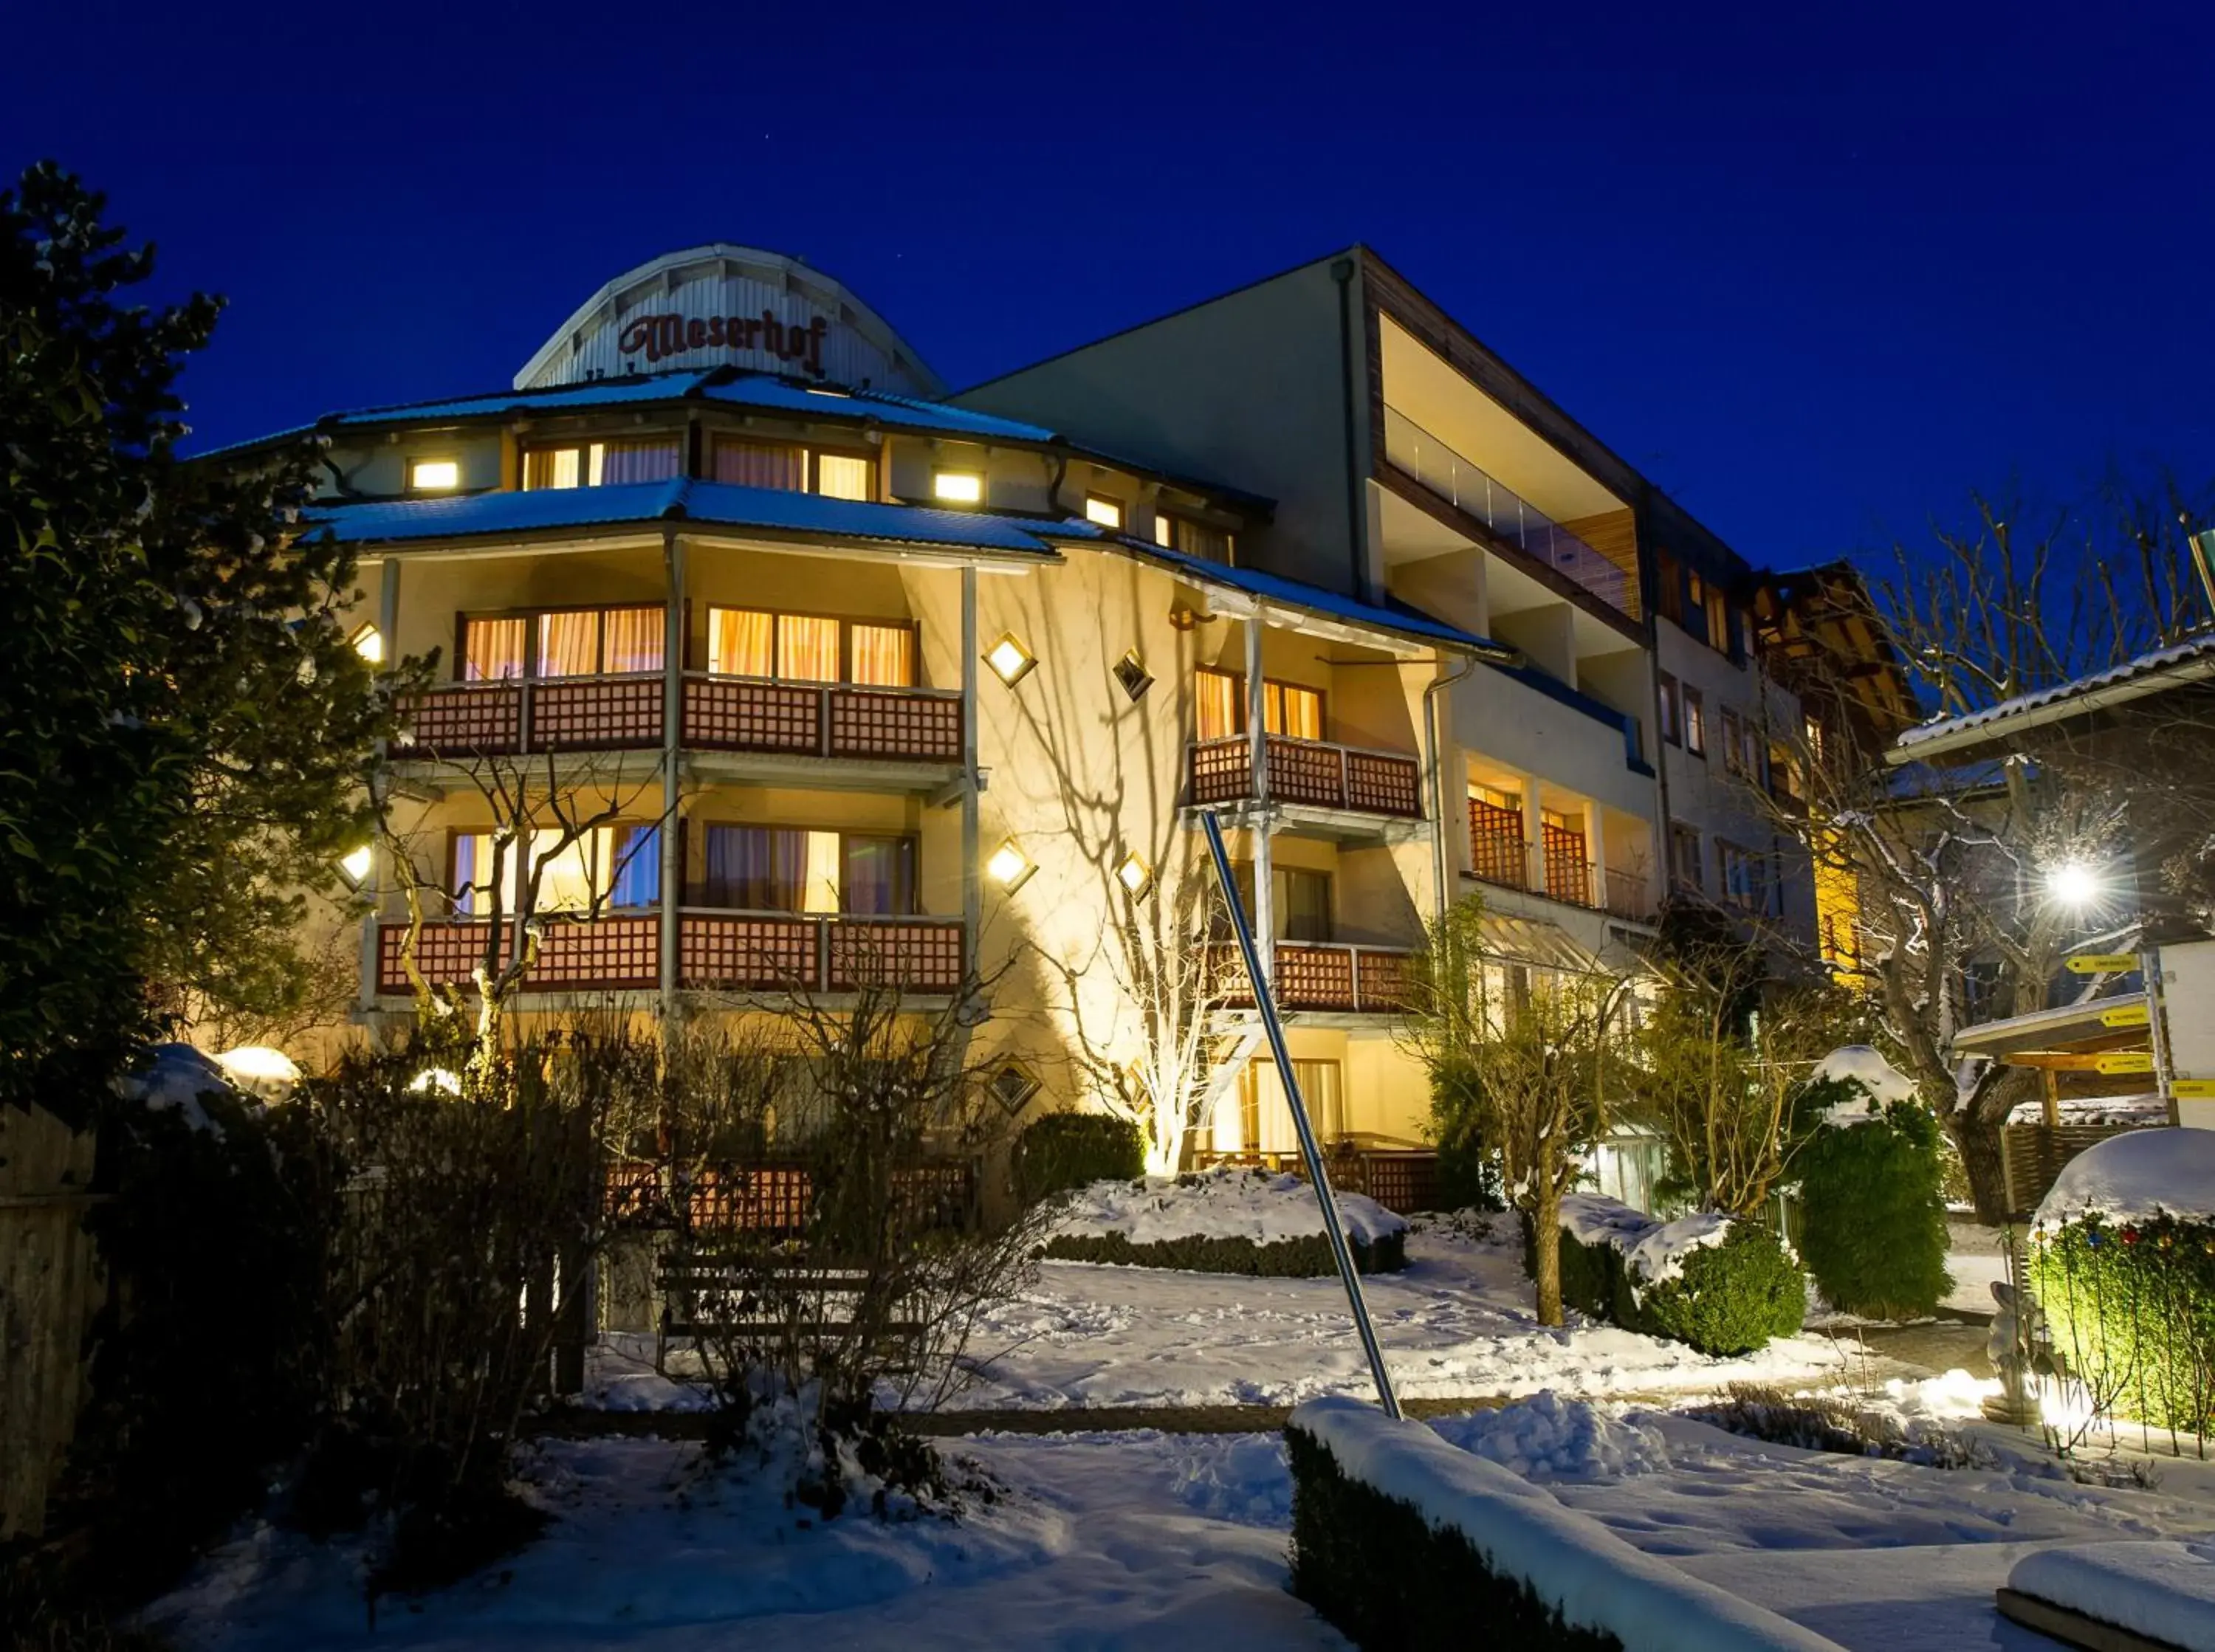 Property building, Winter in Hotel Moserhof